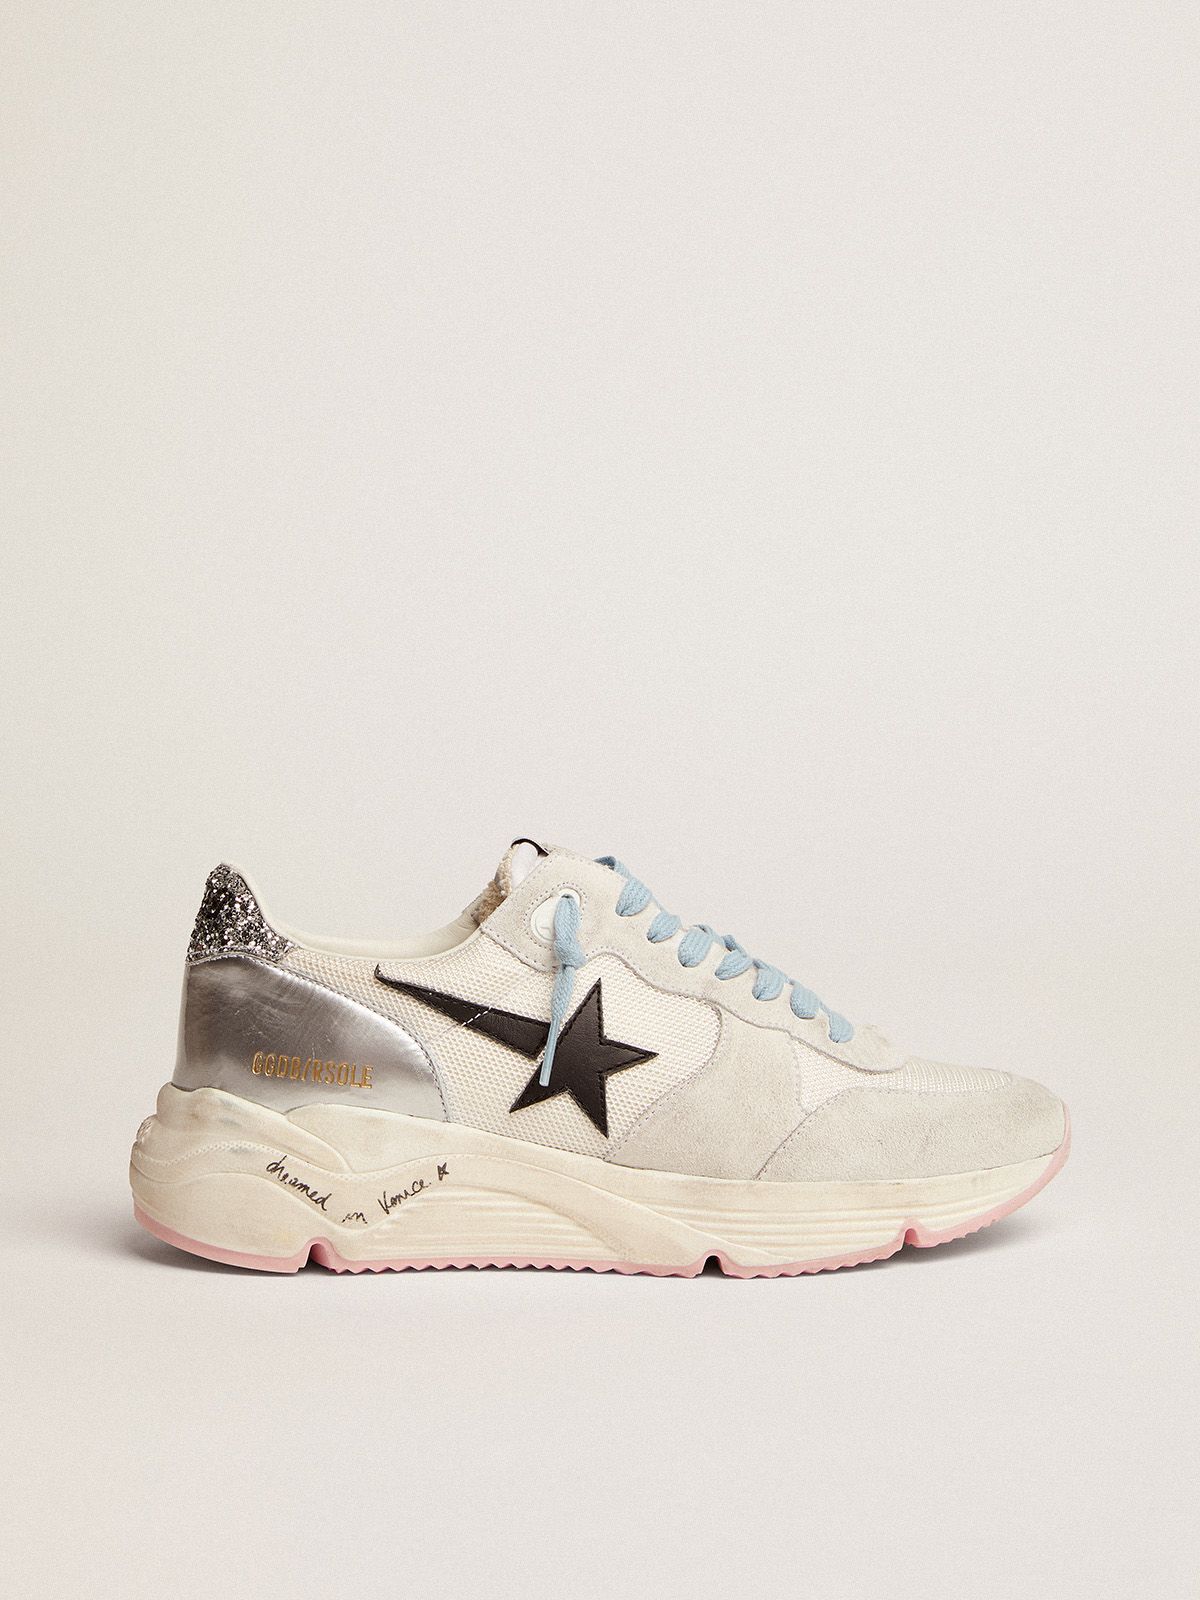 Golden Goose Ball Star Uomo Running Sole LTD sneakers in white mesh and suede with silver glitter heel tab and black leather star